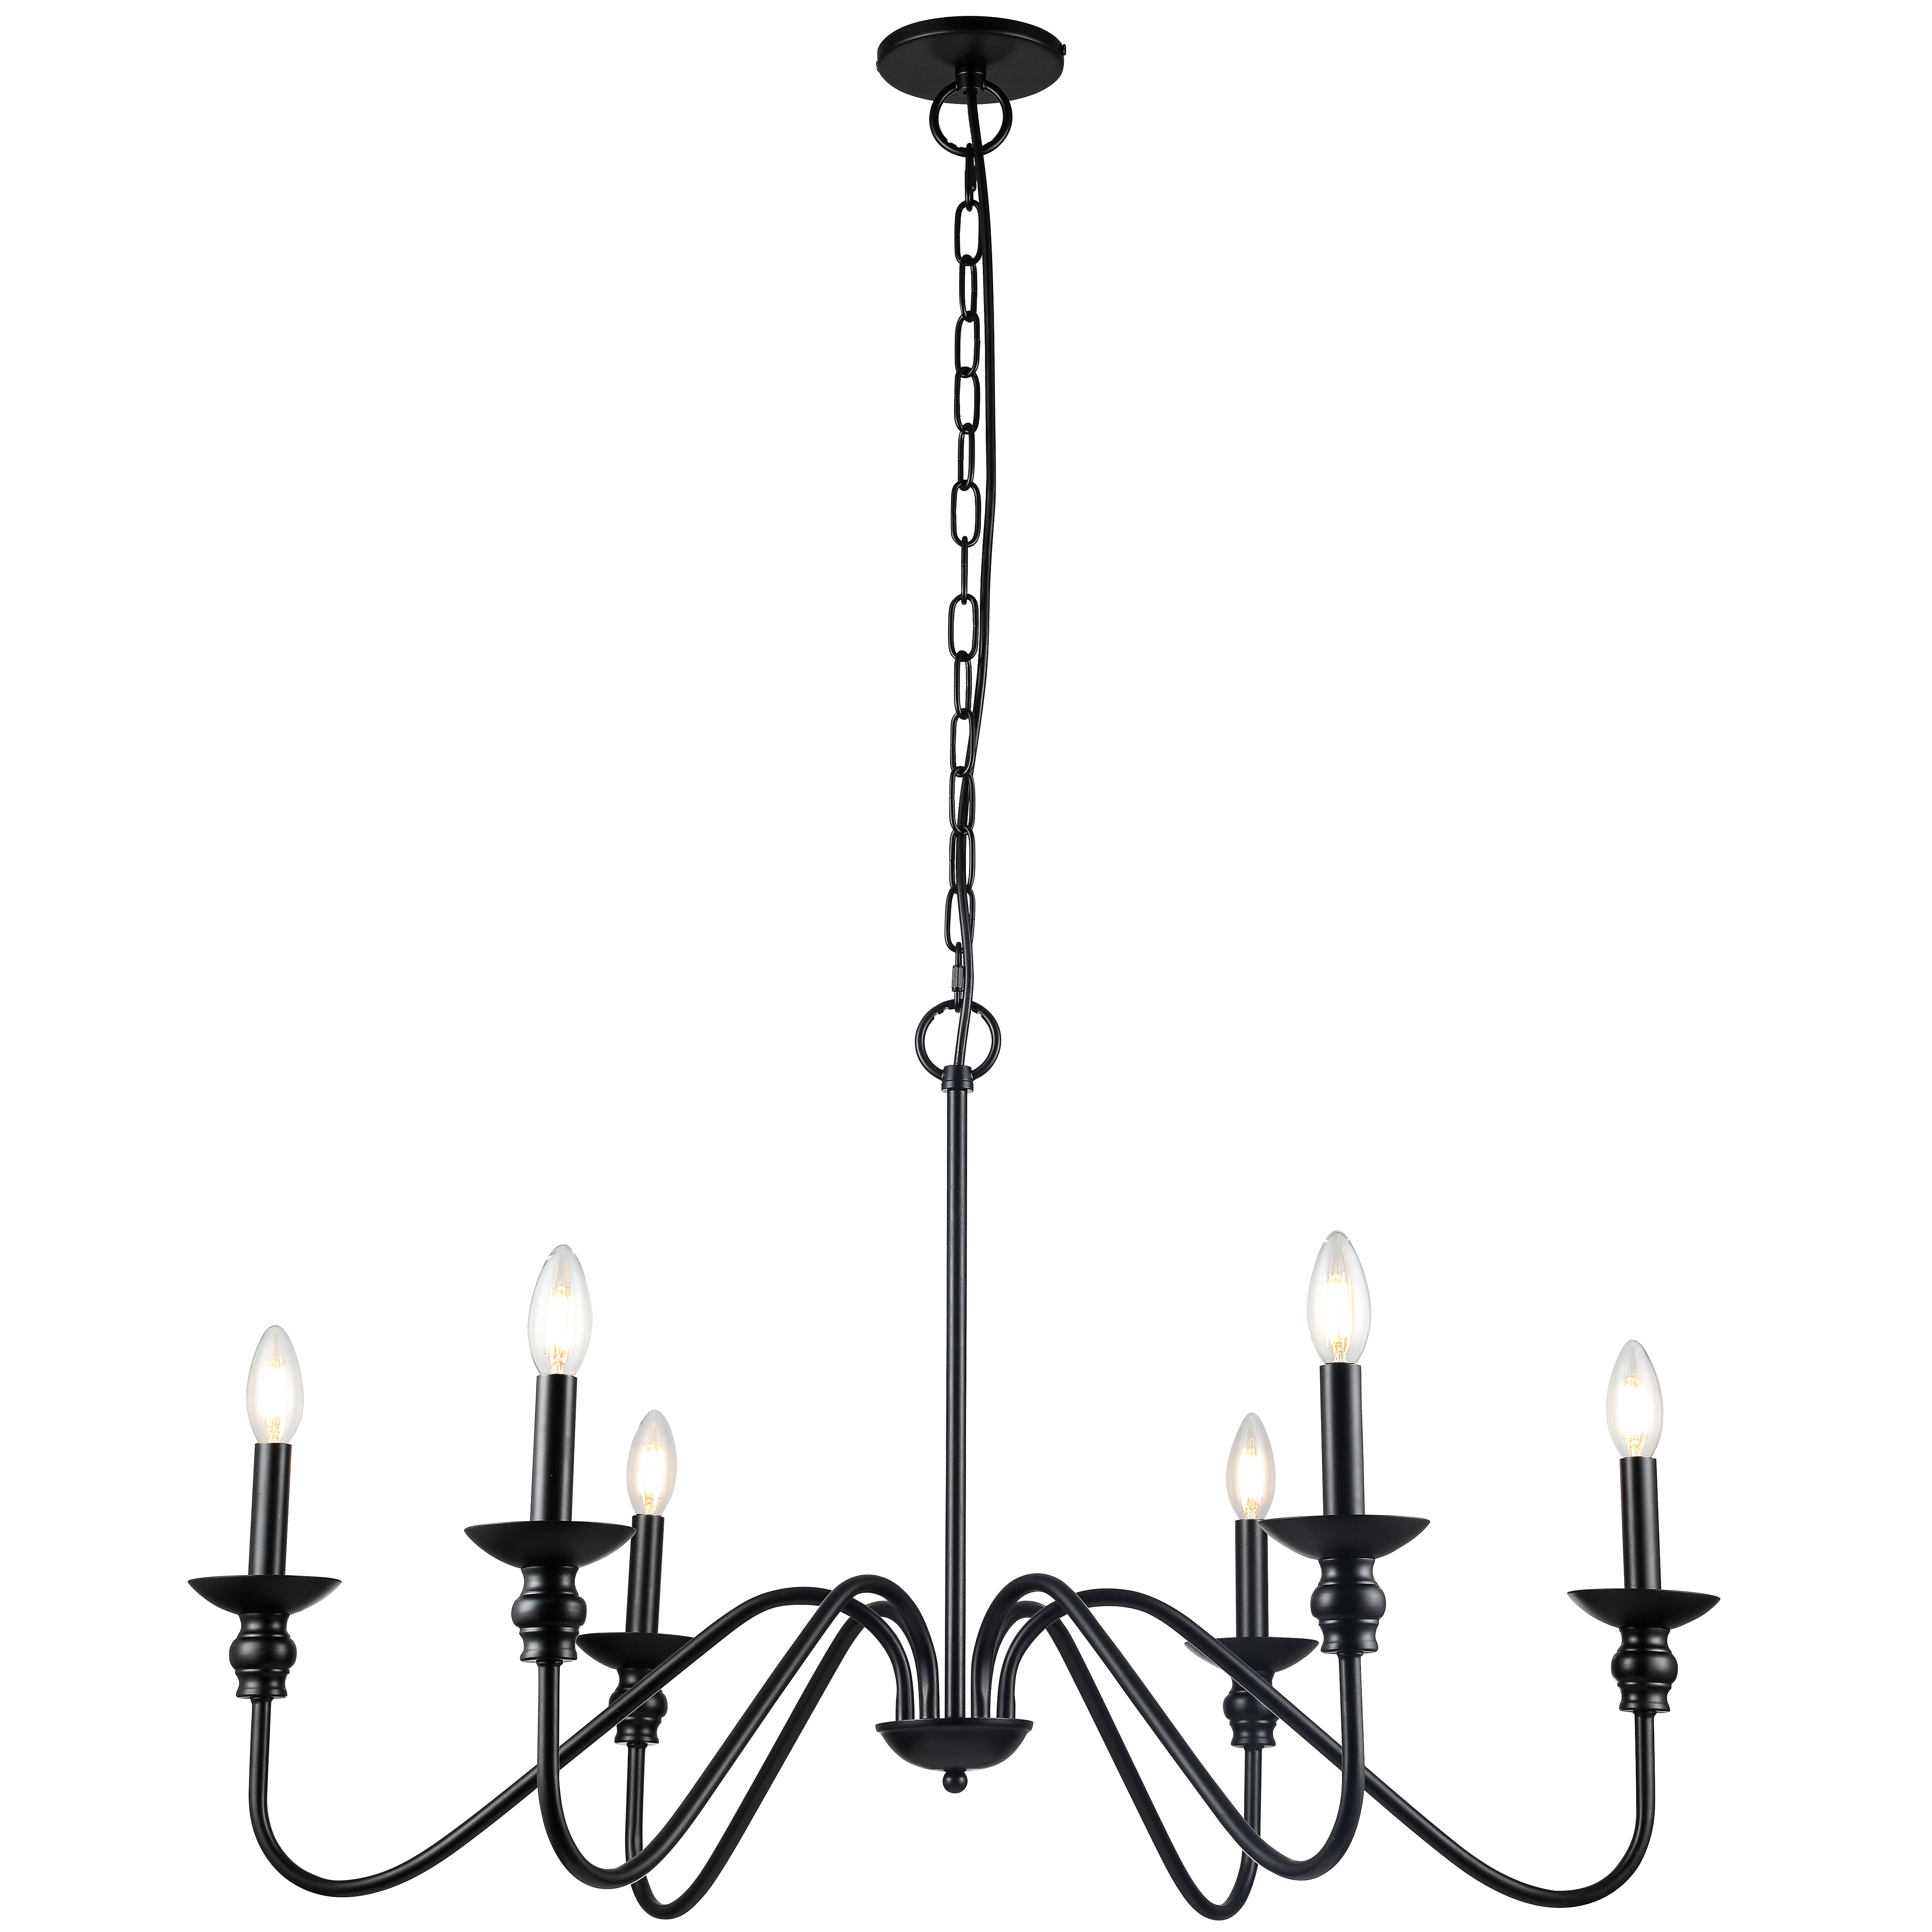 The Clara chandelier has a classic allure that evokes the elegance of Victorian drawing rooms, and styles reminiscent of the early to mid 20th century.  A chain drop with a metal frame in a matte black finish neatly contrasts white incandescent lighting in the traditional candle-like shape. Individual sconces and a symmetrical elegance add to its ageless sense of style.  Clara chandelier lighting is the perfect foil for traditional or even antique décor and furnishings in the dining or living rooms.